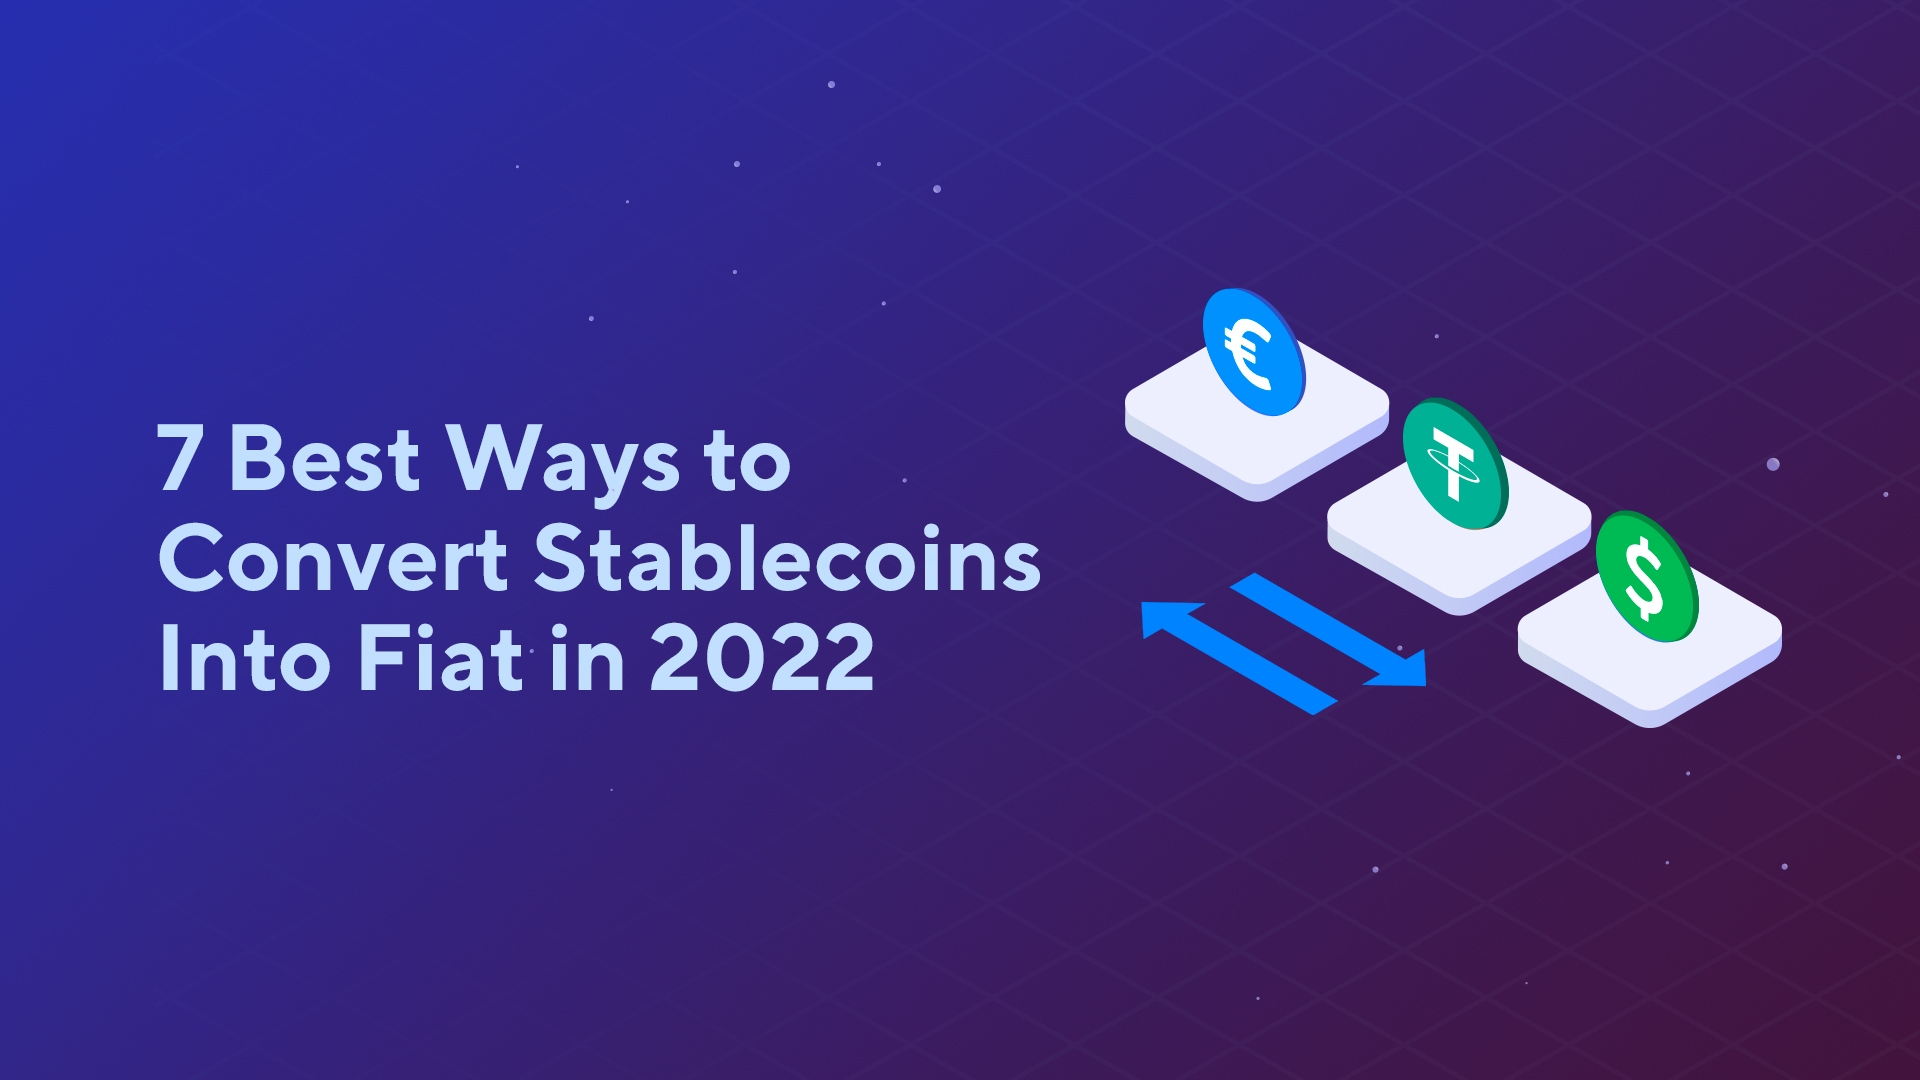 7 Best Ways to Convert Stablecoins Into Fiat in 2022